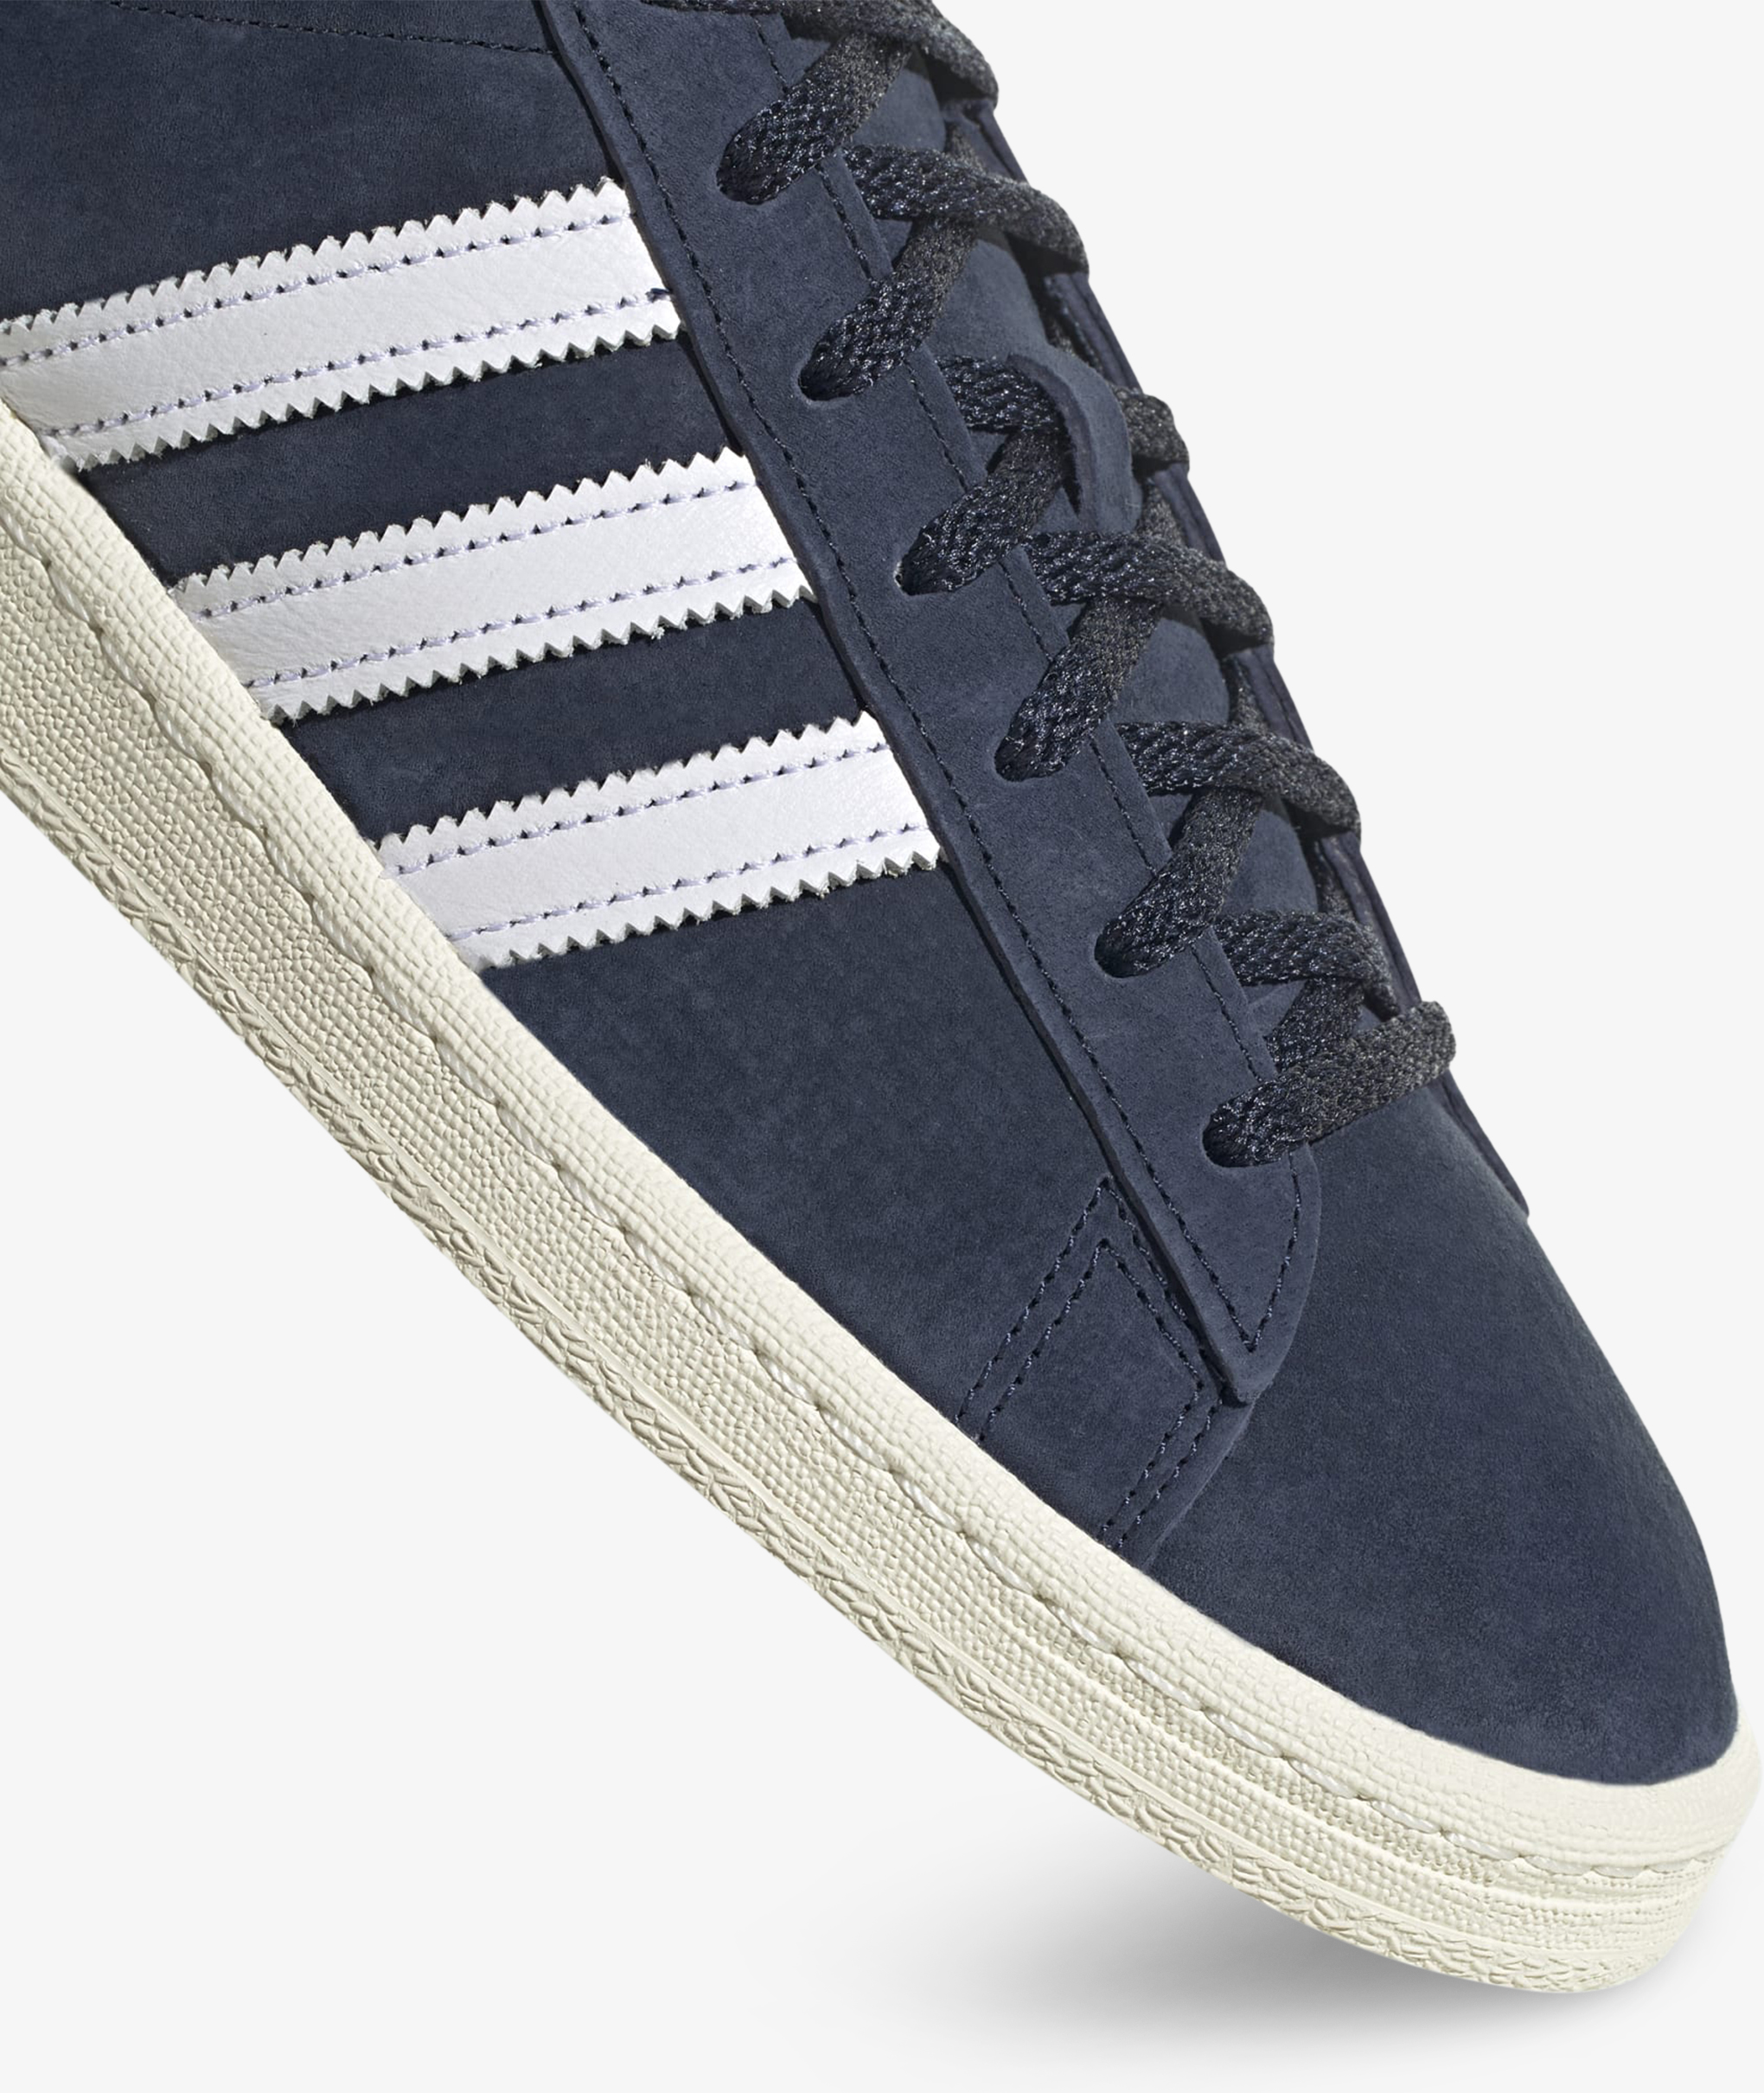 Norse Store | Shipping Worldwide - adidas Originals CAMPUS 80s -  CONAVY/FTWWH